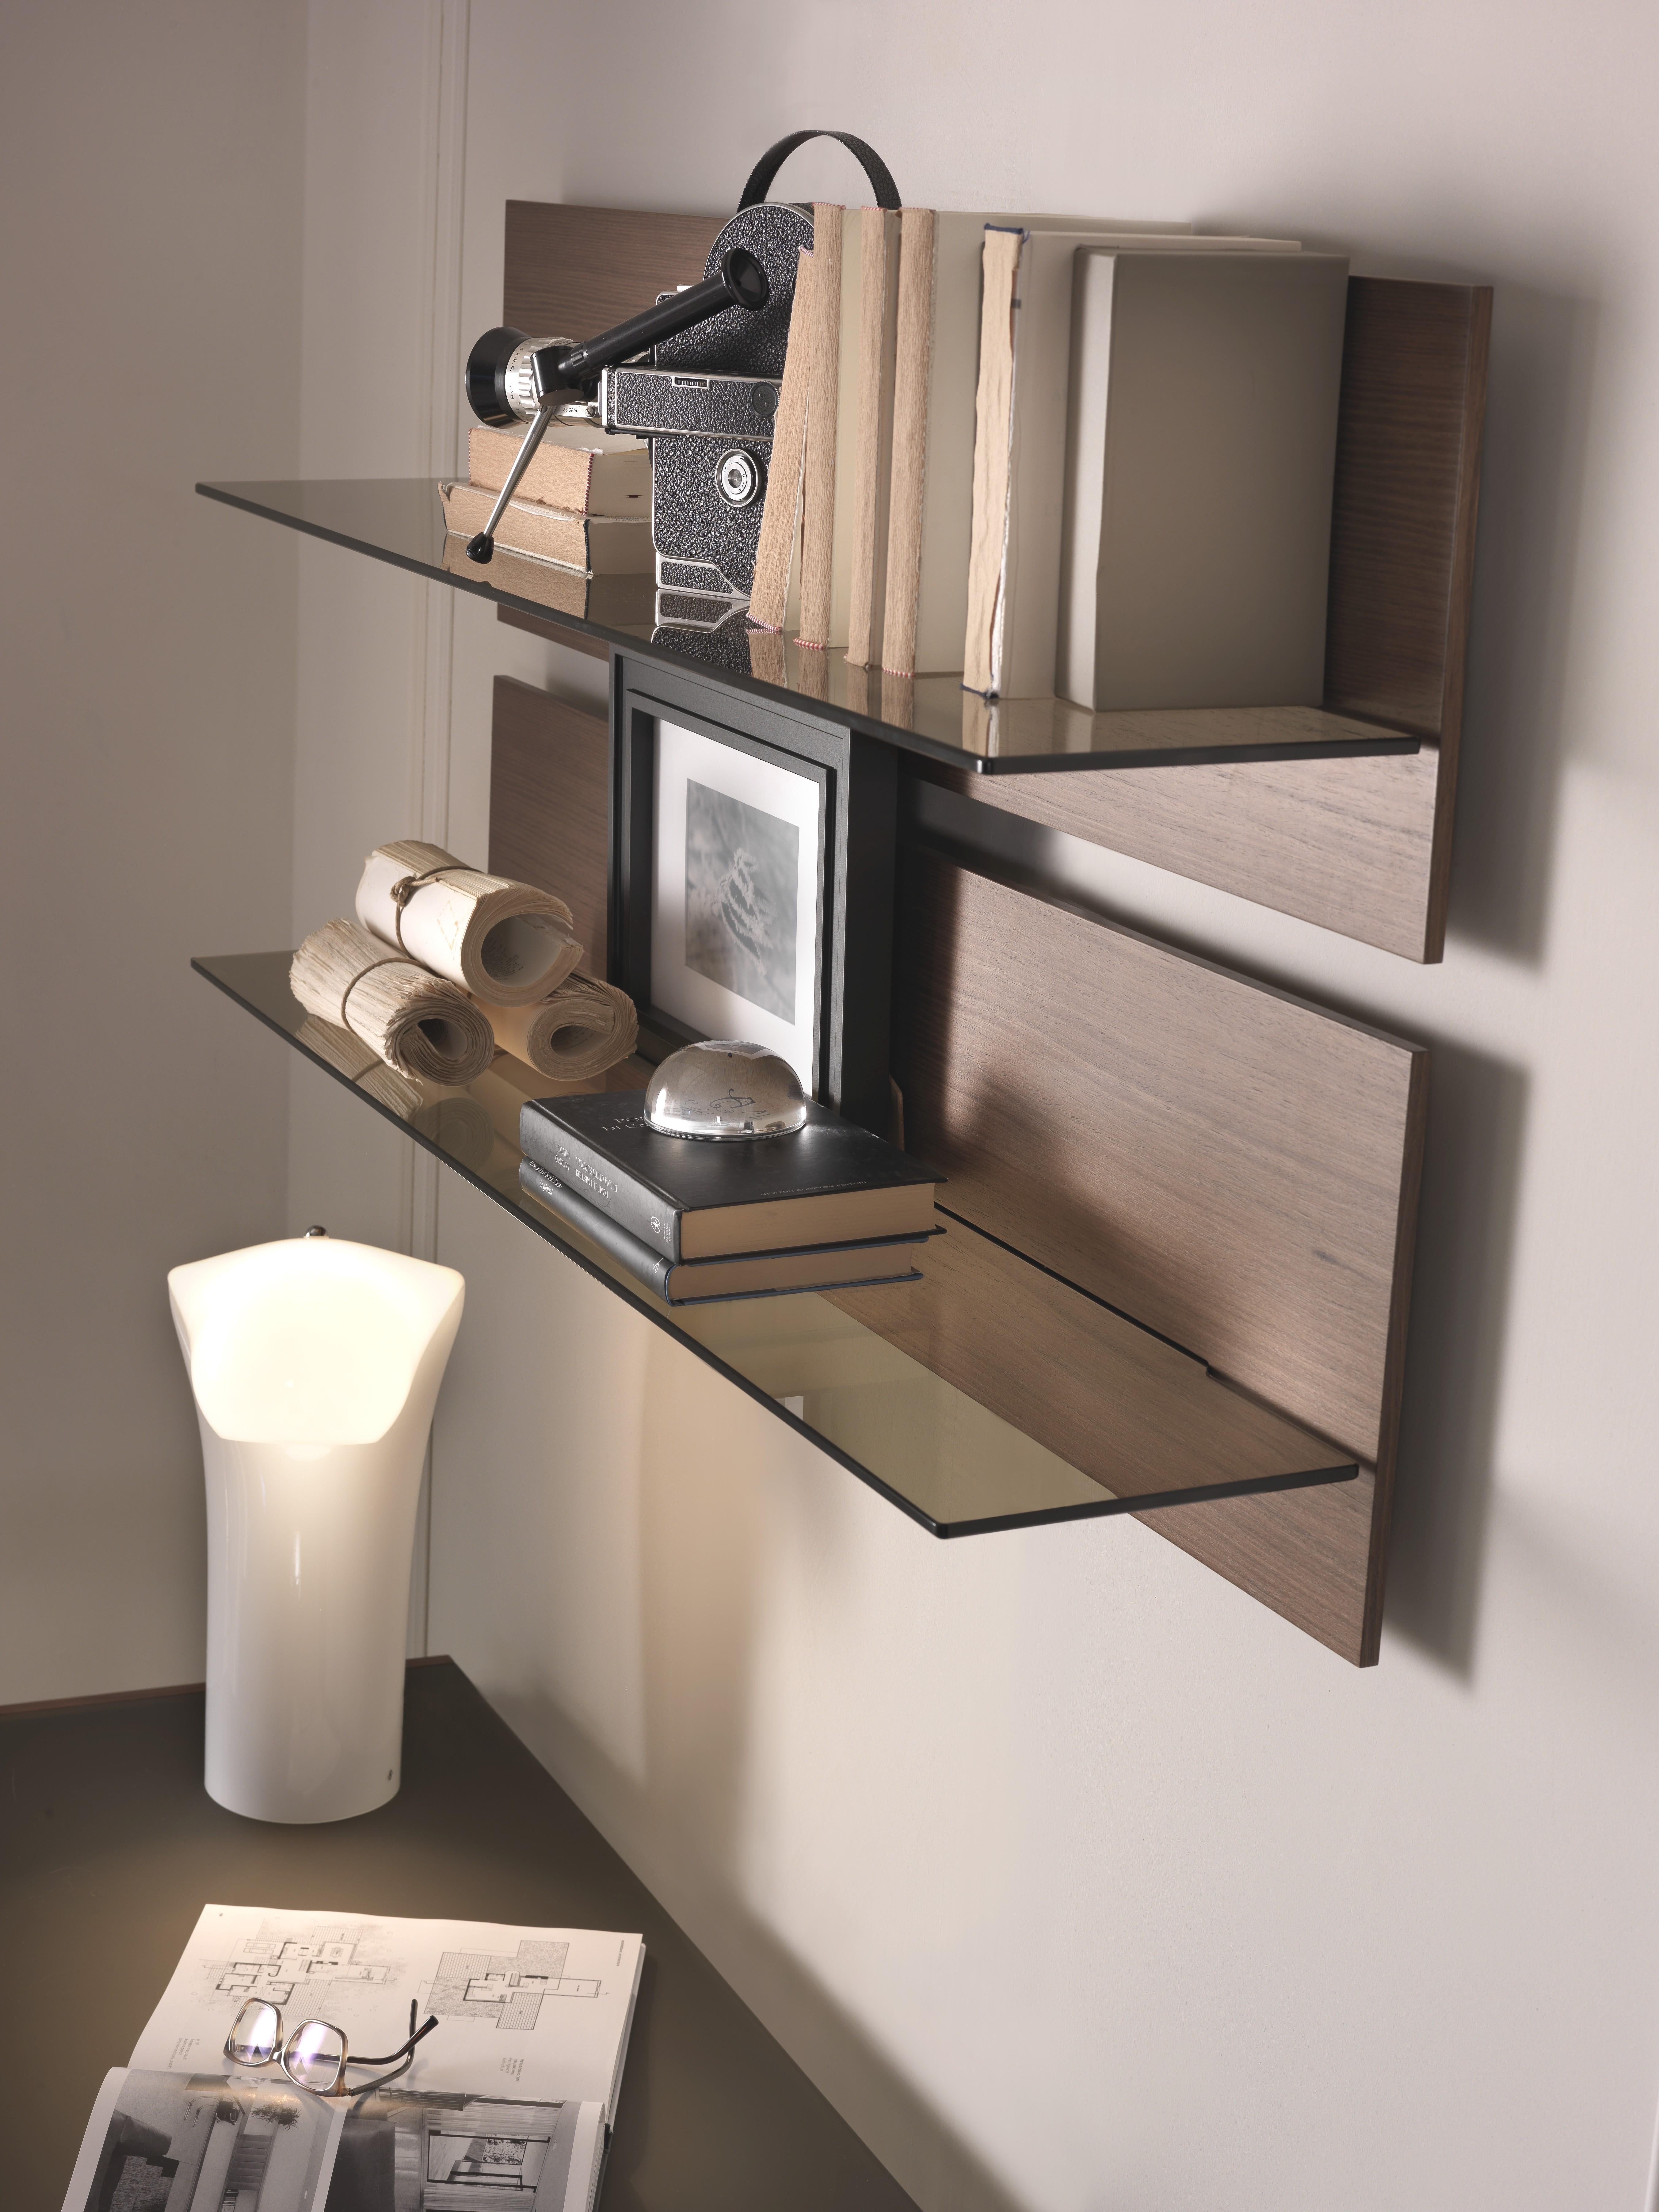 Shelves in veneered ash or fiberboard. Available in tempered clear or transparent bronze glass (8 mm thick). Featured in walnut wood with a transparent bronze.

Fabio Rebosio started to take his first steps into the world of architecture as an